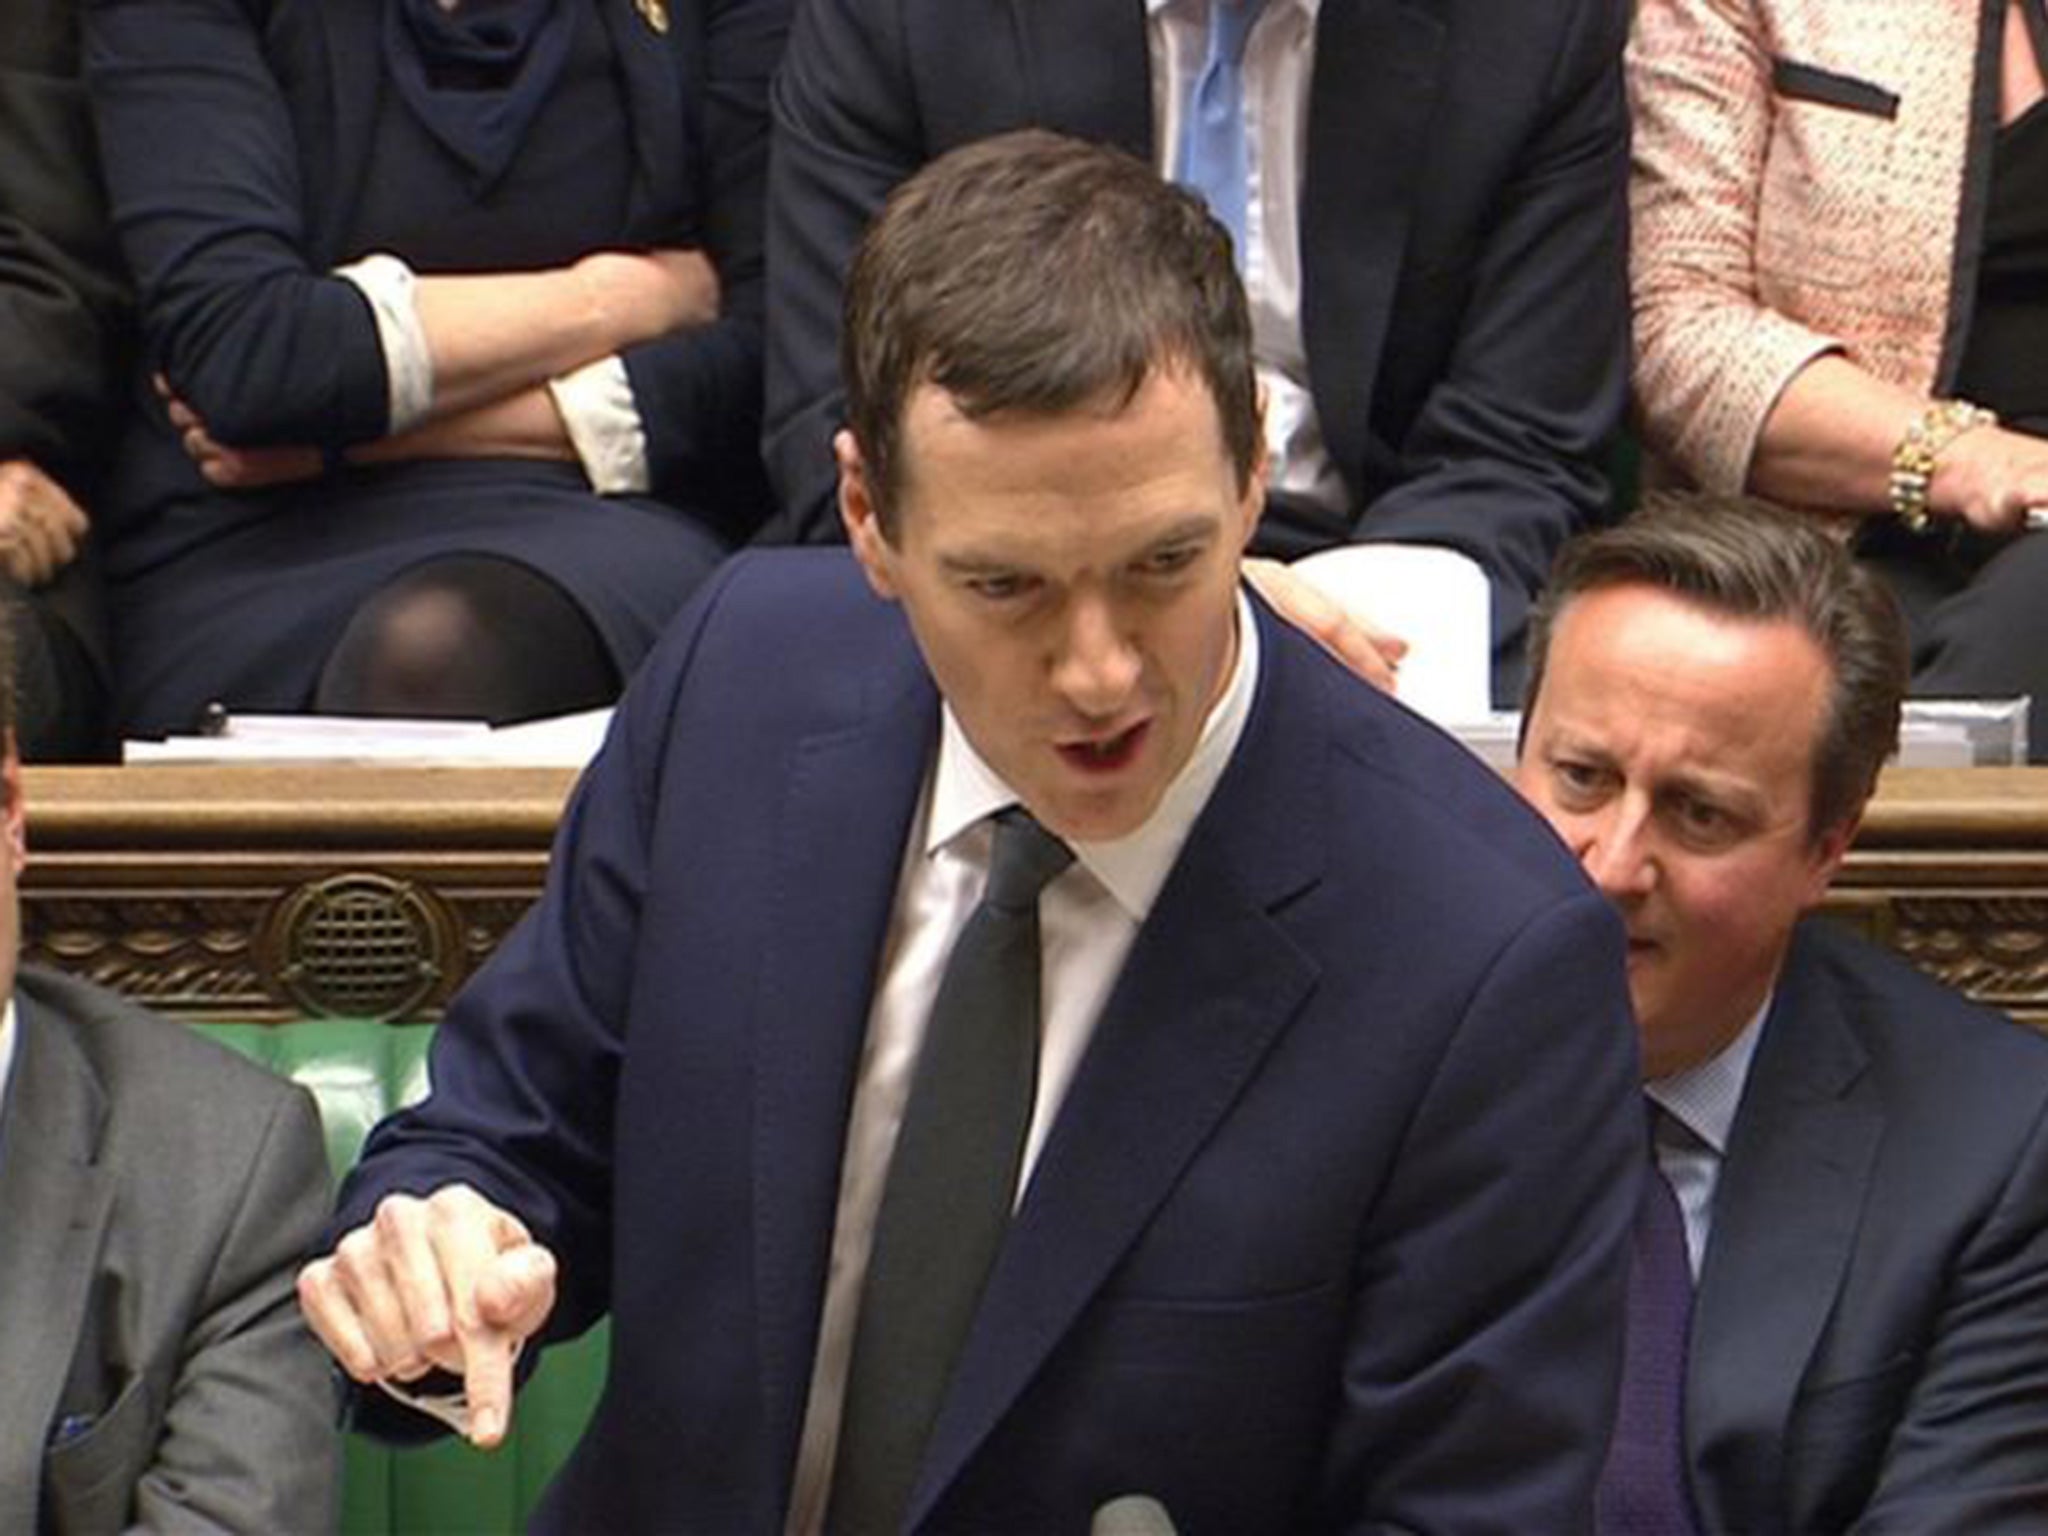 George Osborne is among the favourites to take over as PM when David Cameron steps down